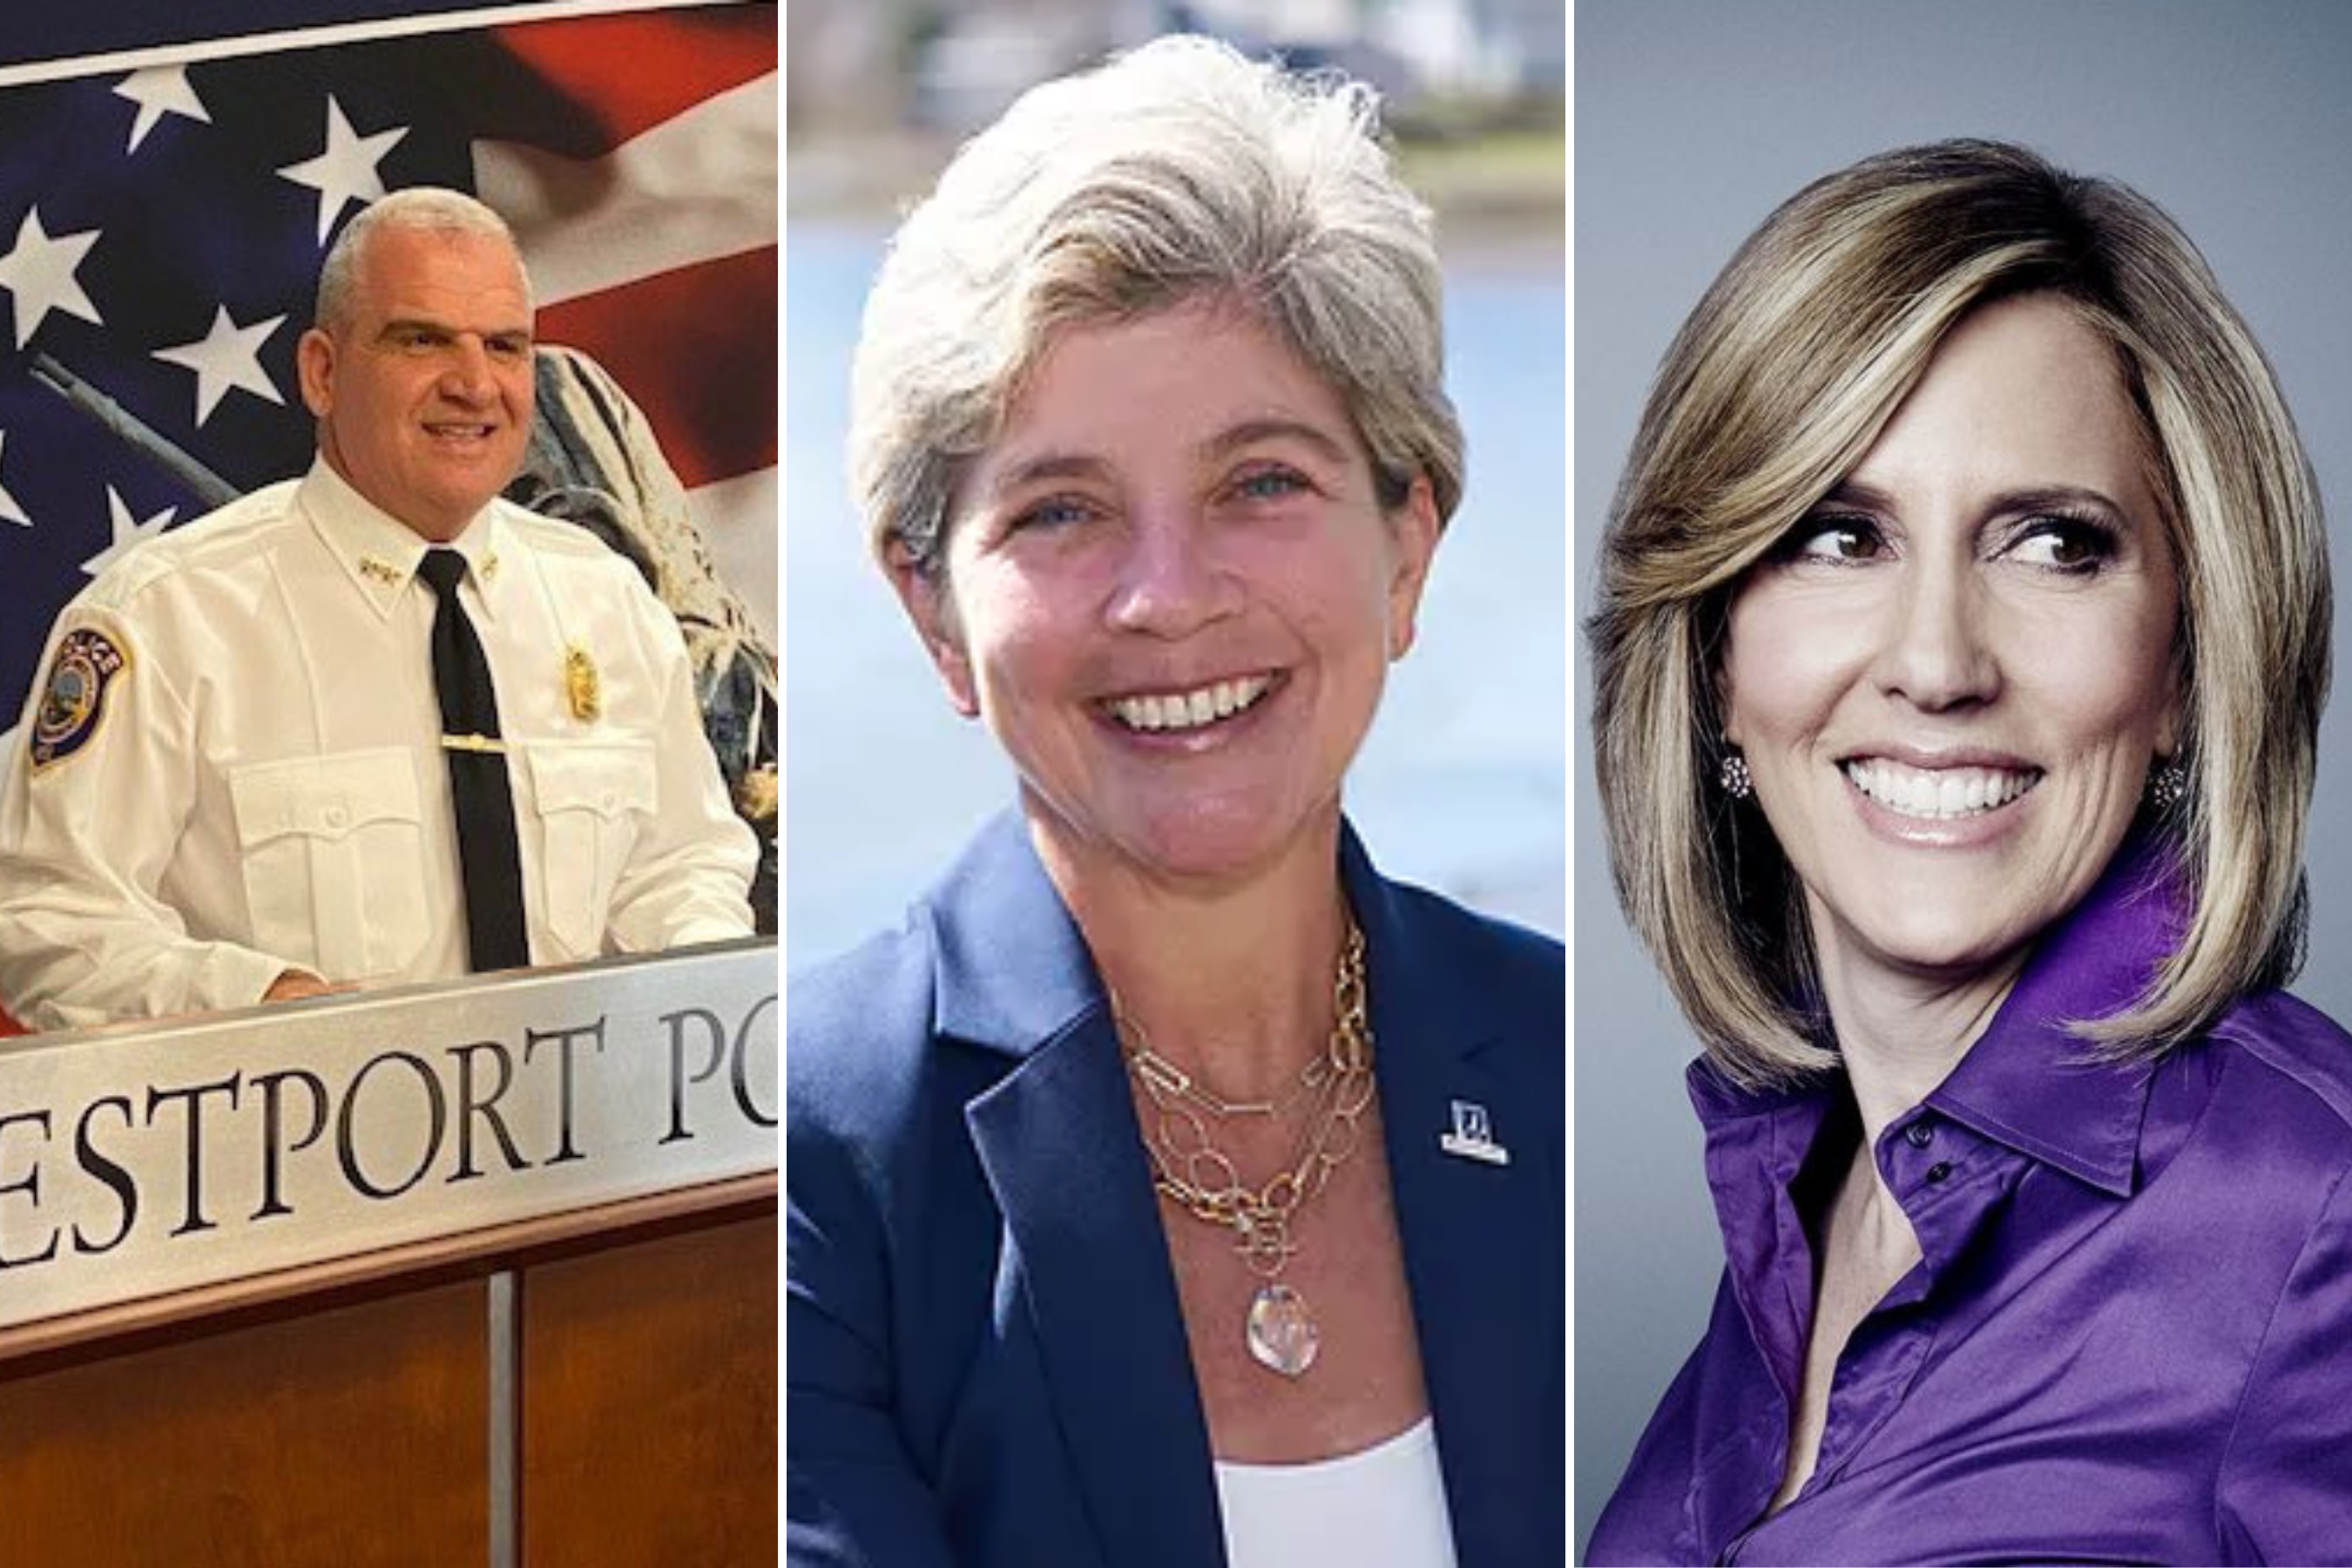 Split image of, L to R, Westport Chief of (left to right) Police Foti Koskinas, Westport First Selectwoman Jen Tooker, and CNN anchor Alisyn Camerota.